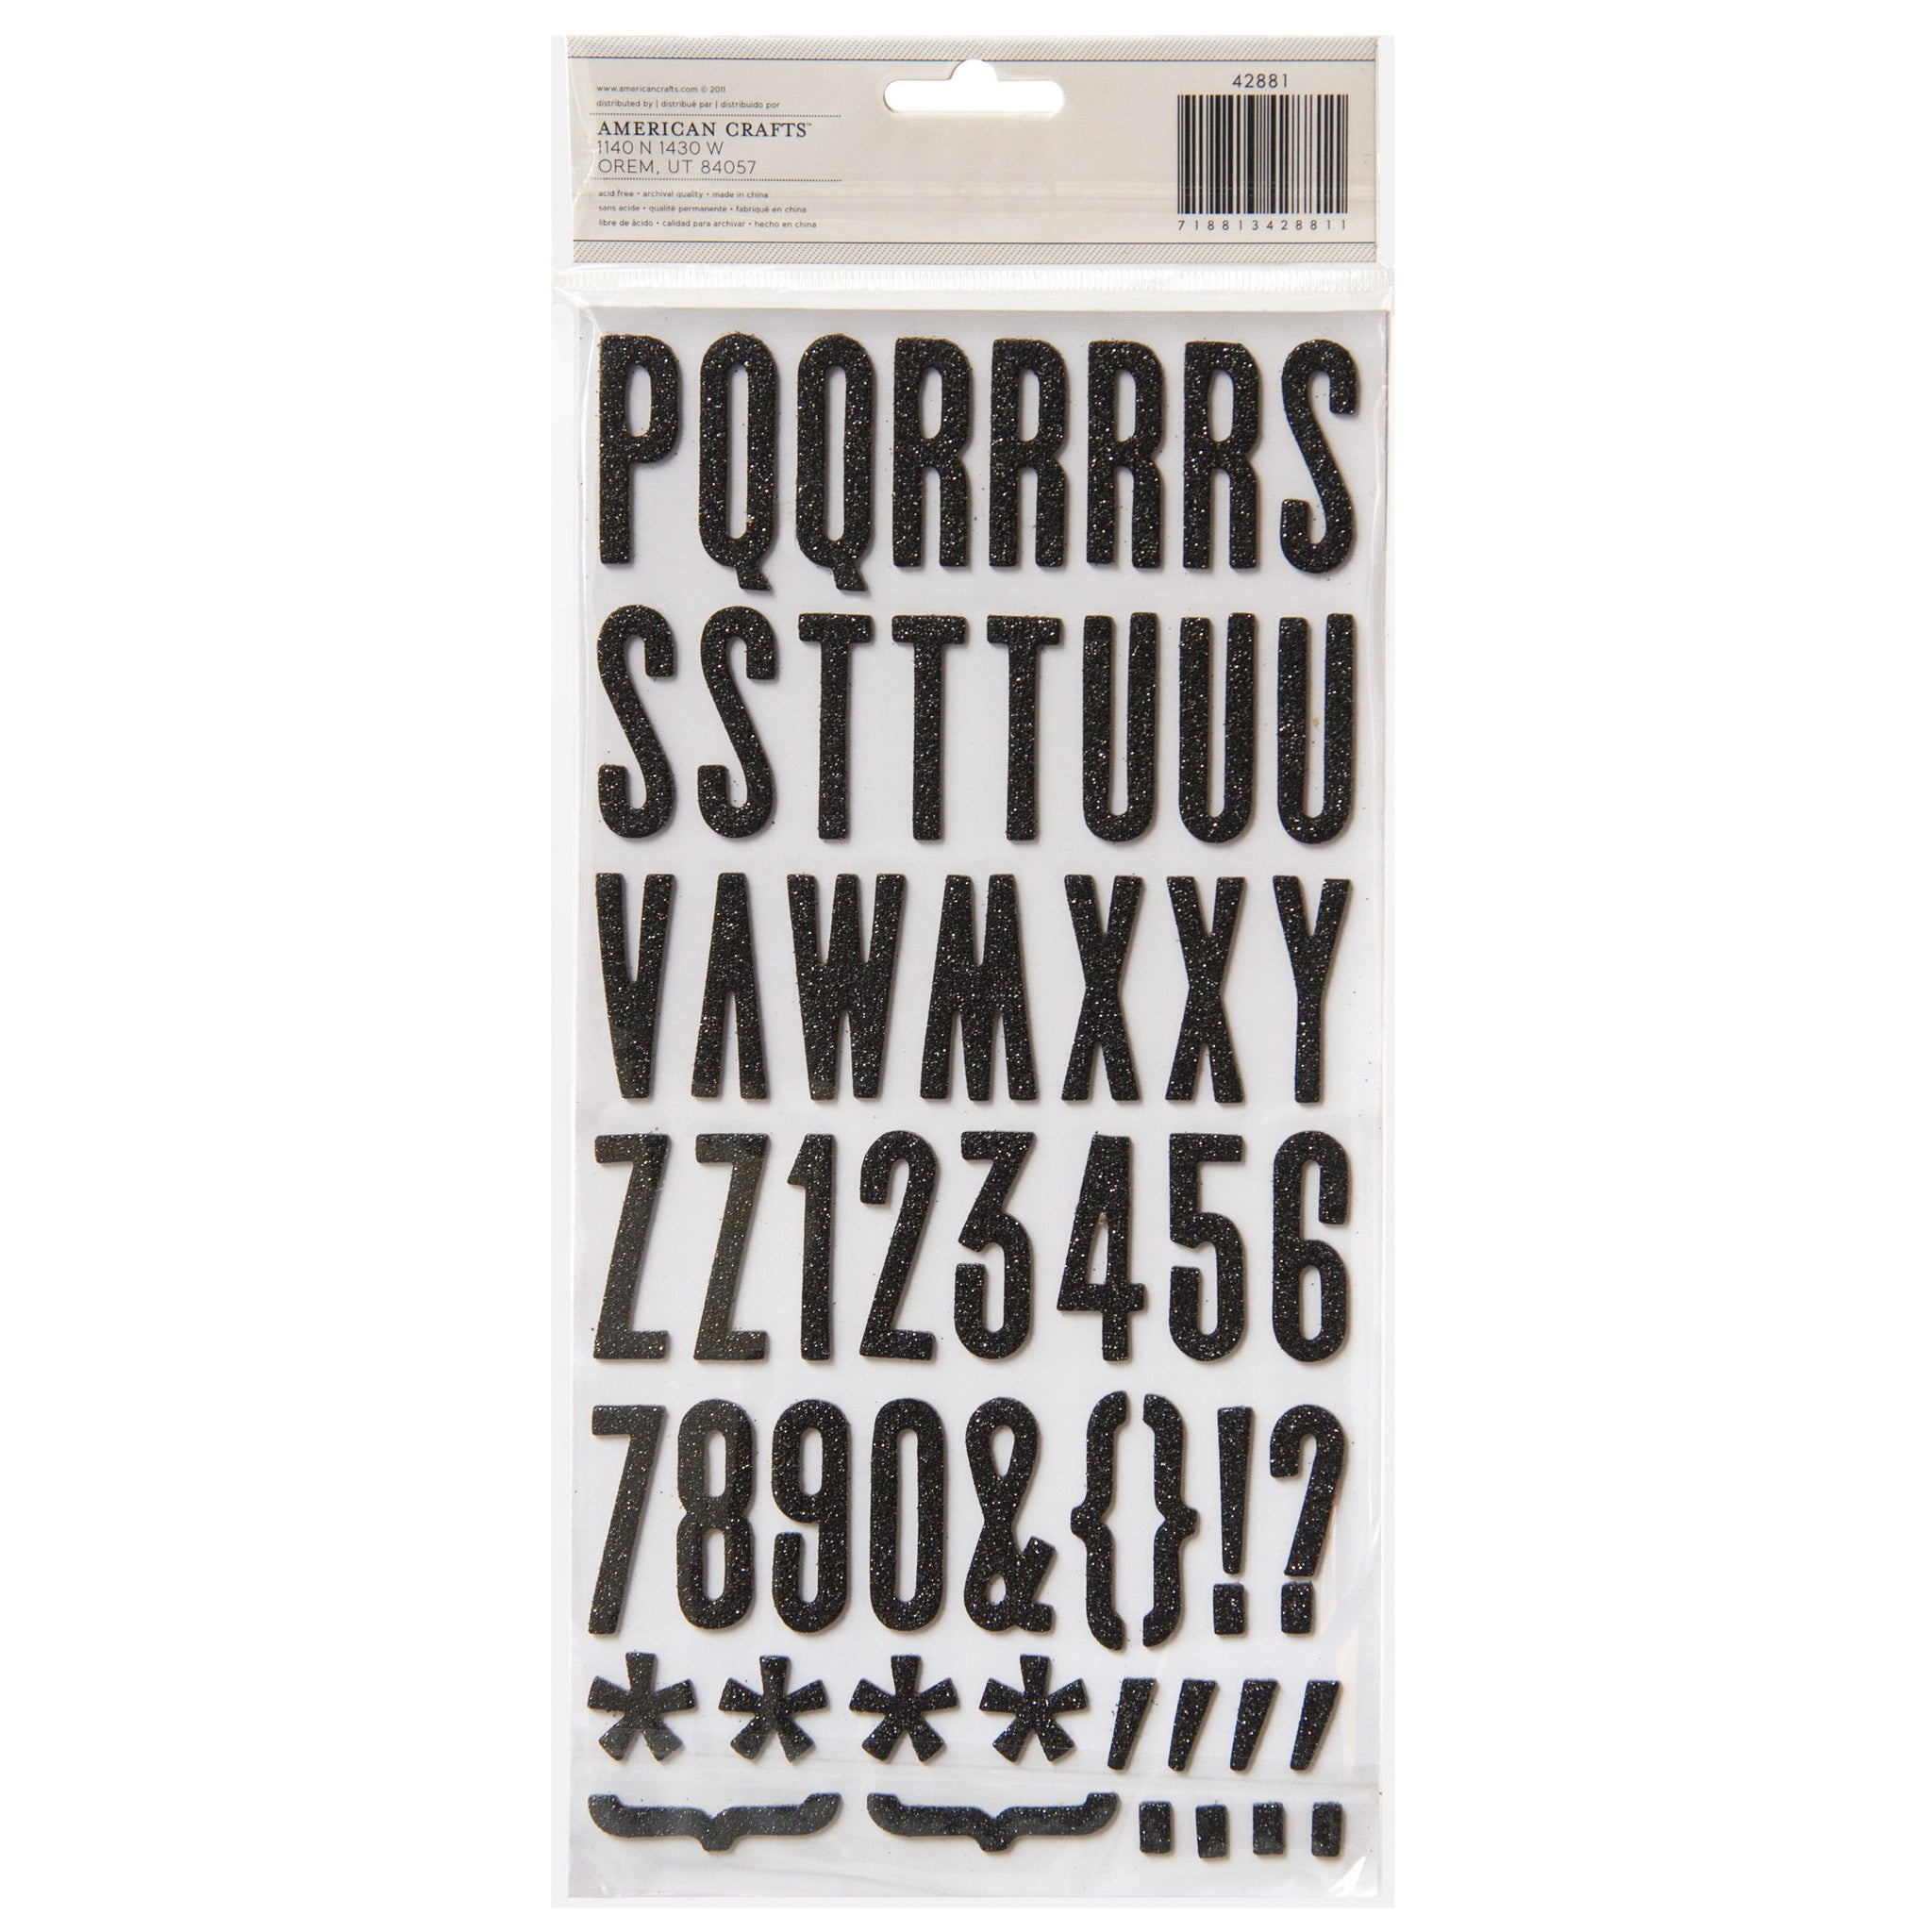 American Crafts Thickers Shoebox Glitter Letter Stickers Black (42881) –  Everything Mixed Media